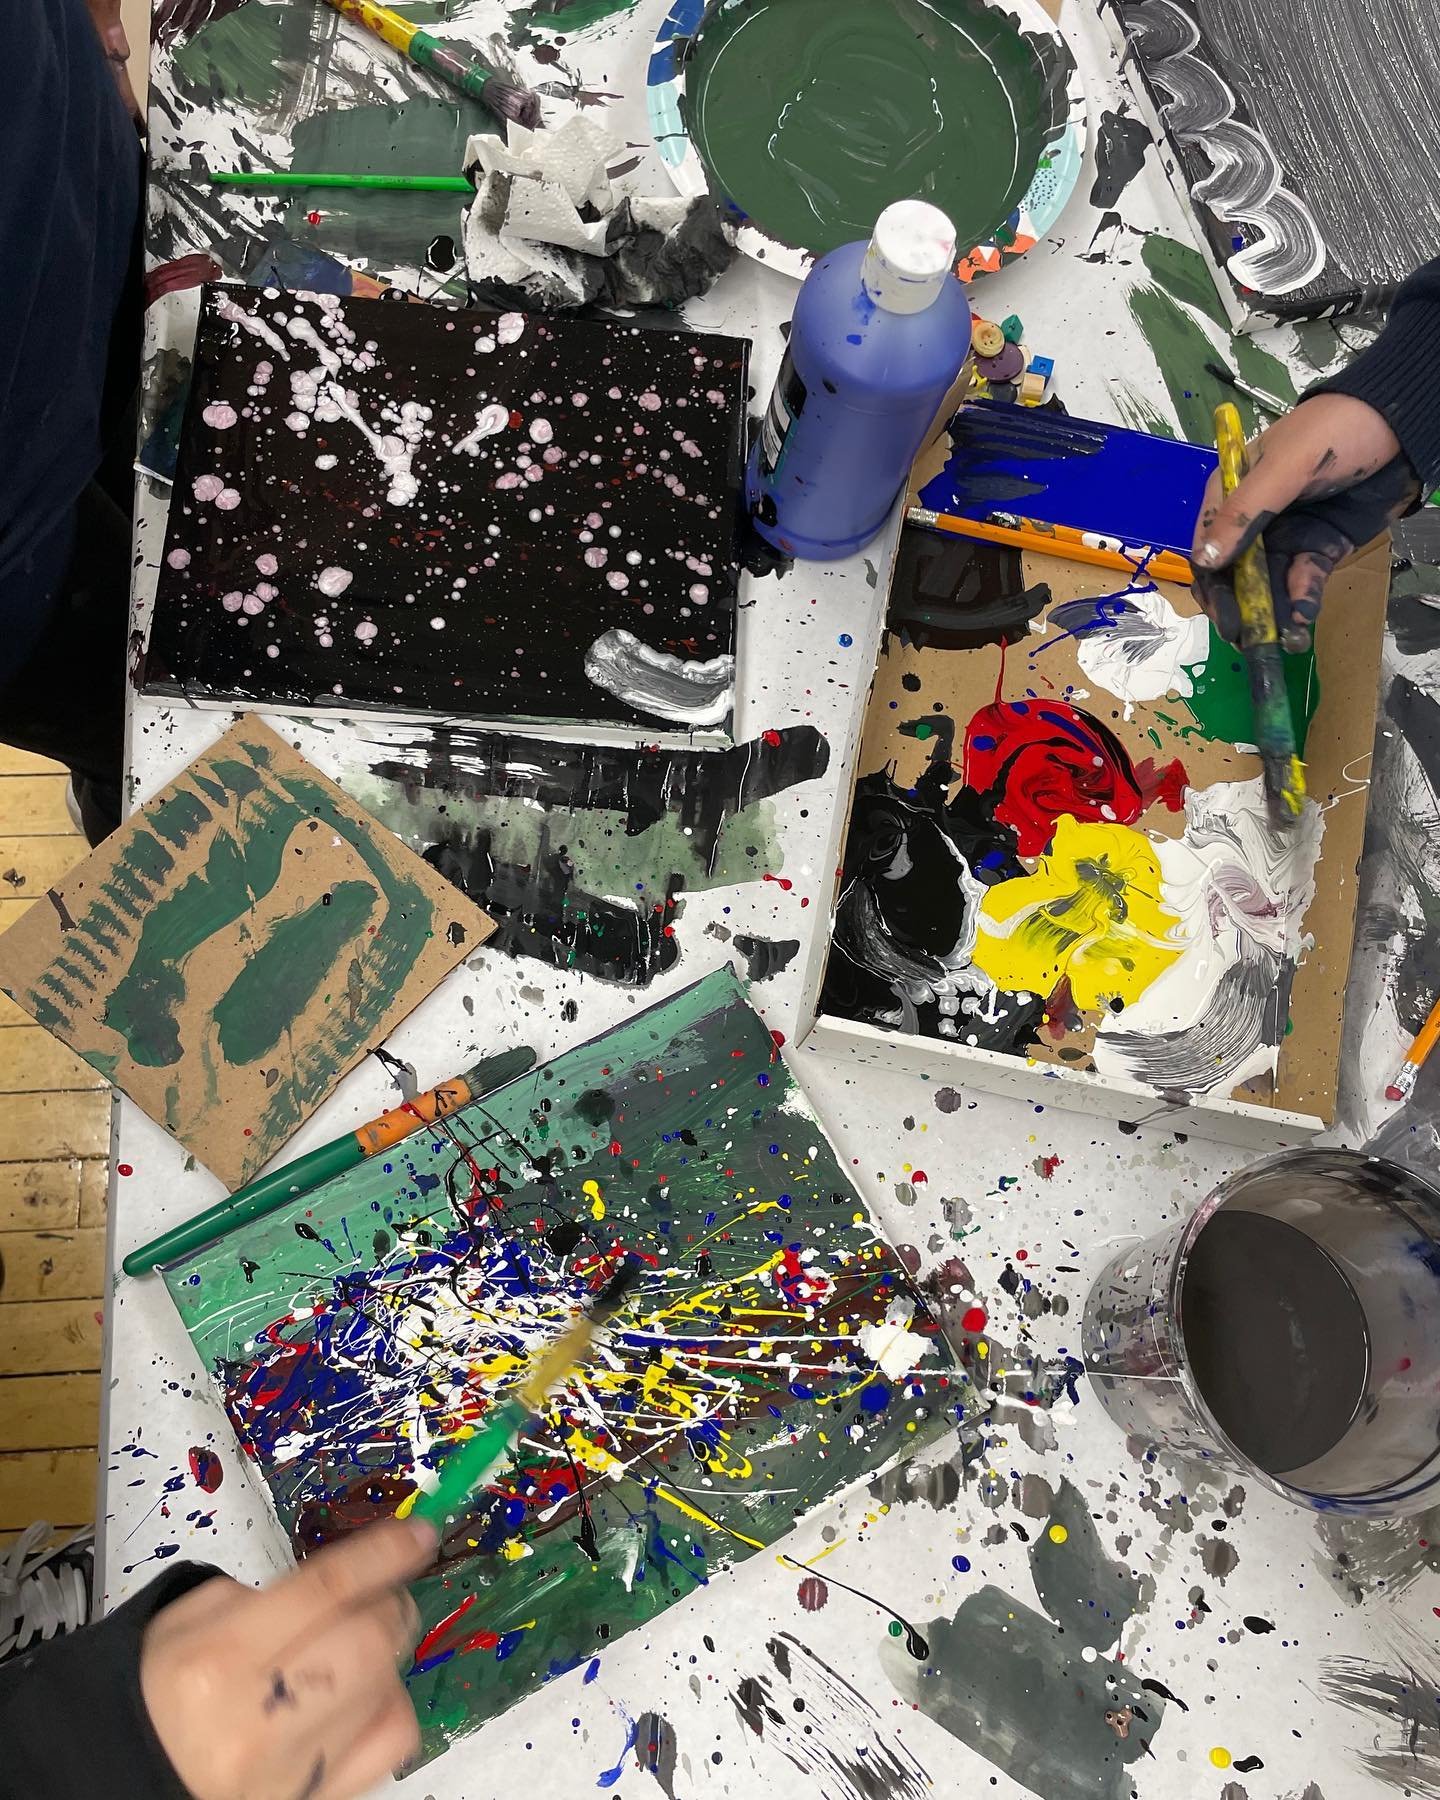 We are pleased to announce that the National Endowment for the Arts has approved Open Studio Project for a Grants for Arts Projects award of $20,000. The grant will enhance current visual arts &amp; social emotional learning programs in Chicago Publi